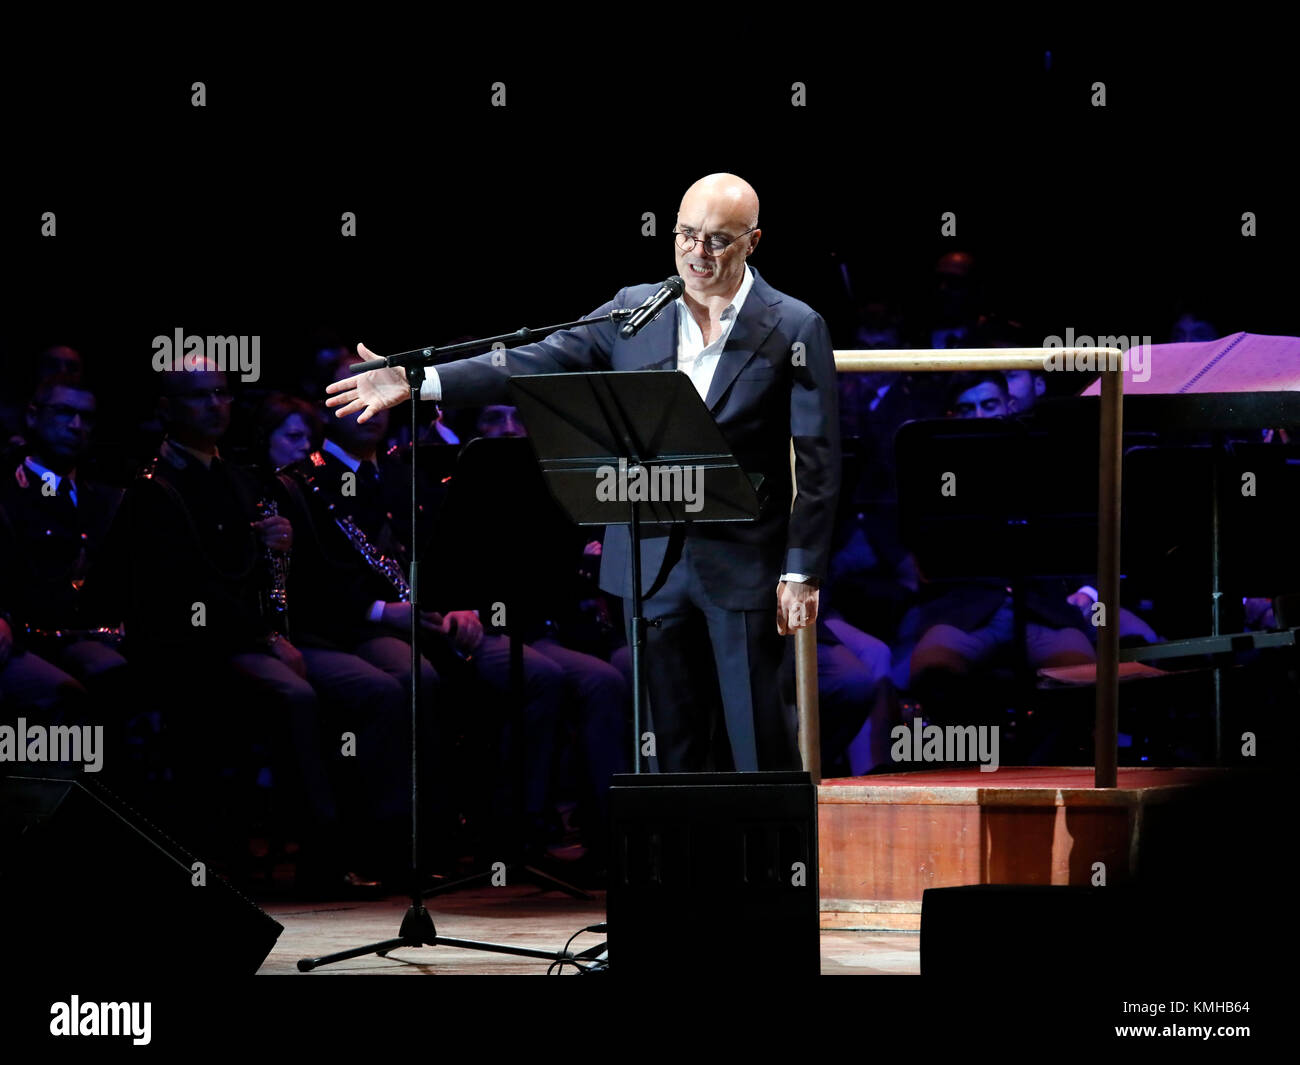 Rome, Italy - 11 December 2017: the actor Luca Zingaretti performs on the stage of the Auditorium Parco della Musica, on the occasion of the concert of the State Police Band, 'Be there always, with music and words'. Stock Photo